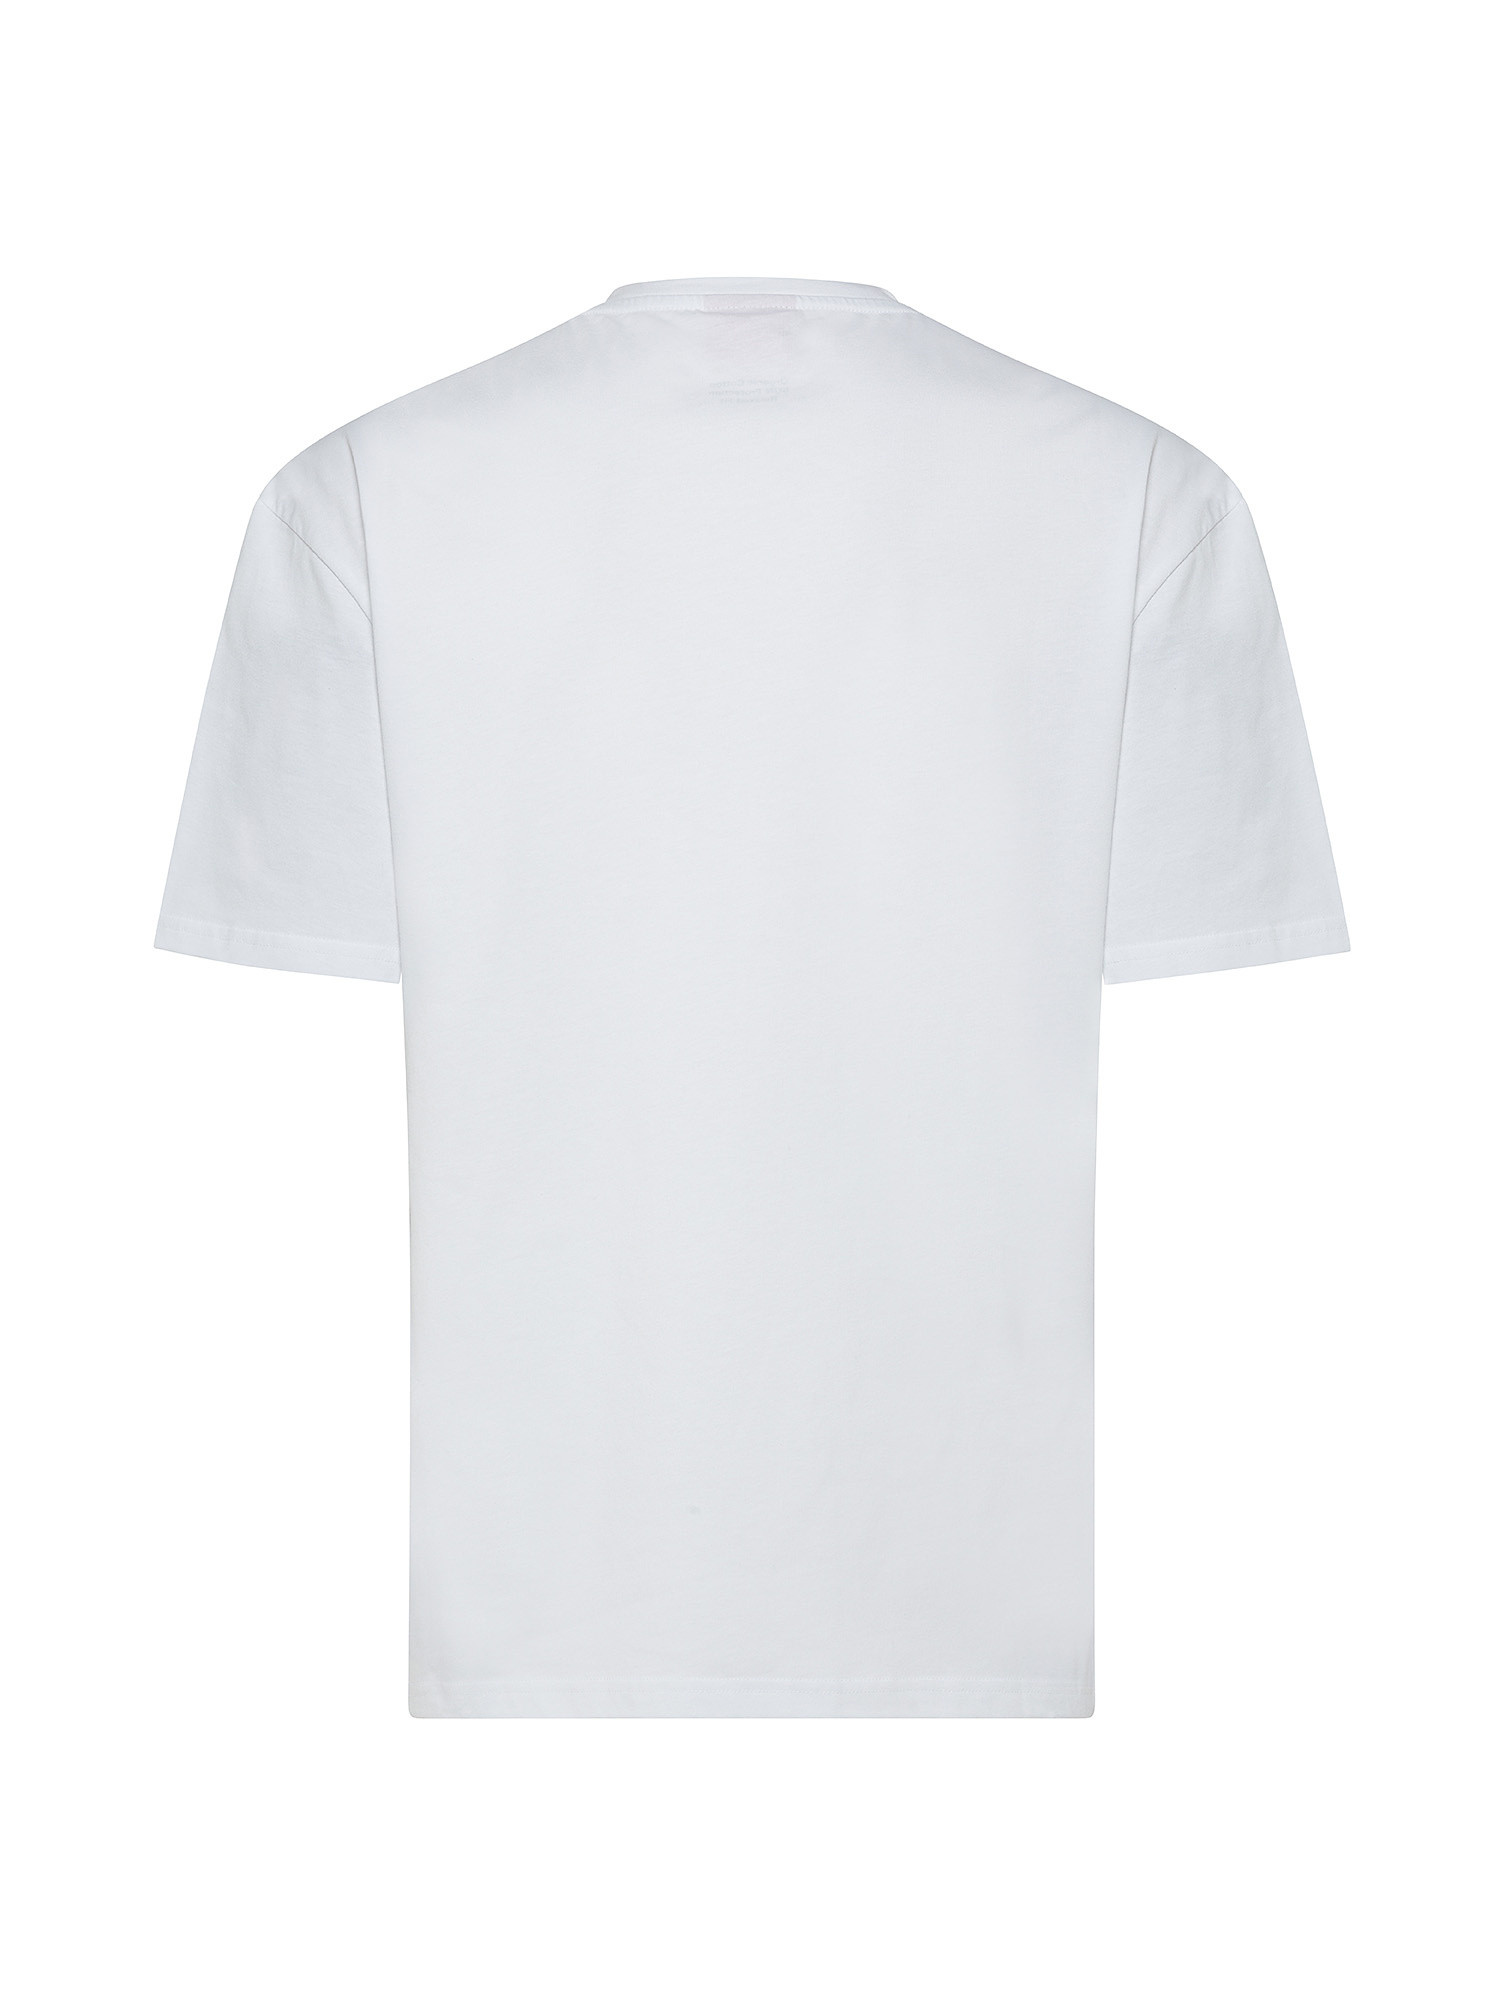 Hugo - T-shirt con stampa logo in cotone, Bianco, large image number 1